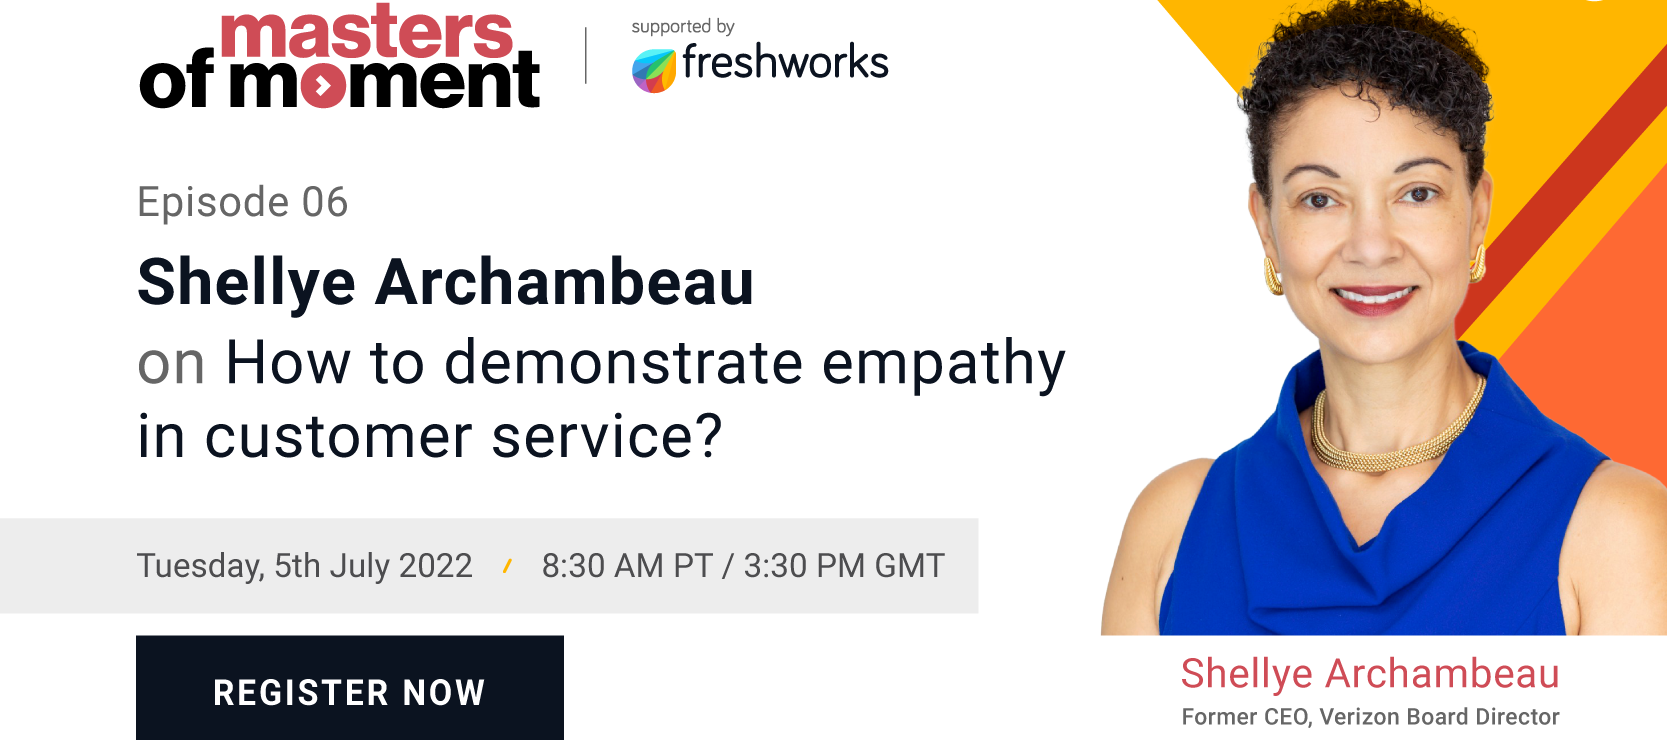 Masters of Moment (July 5th) - How to demonstrate empathy in customer service?